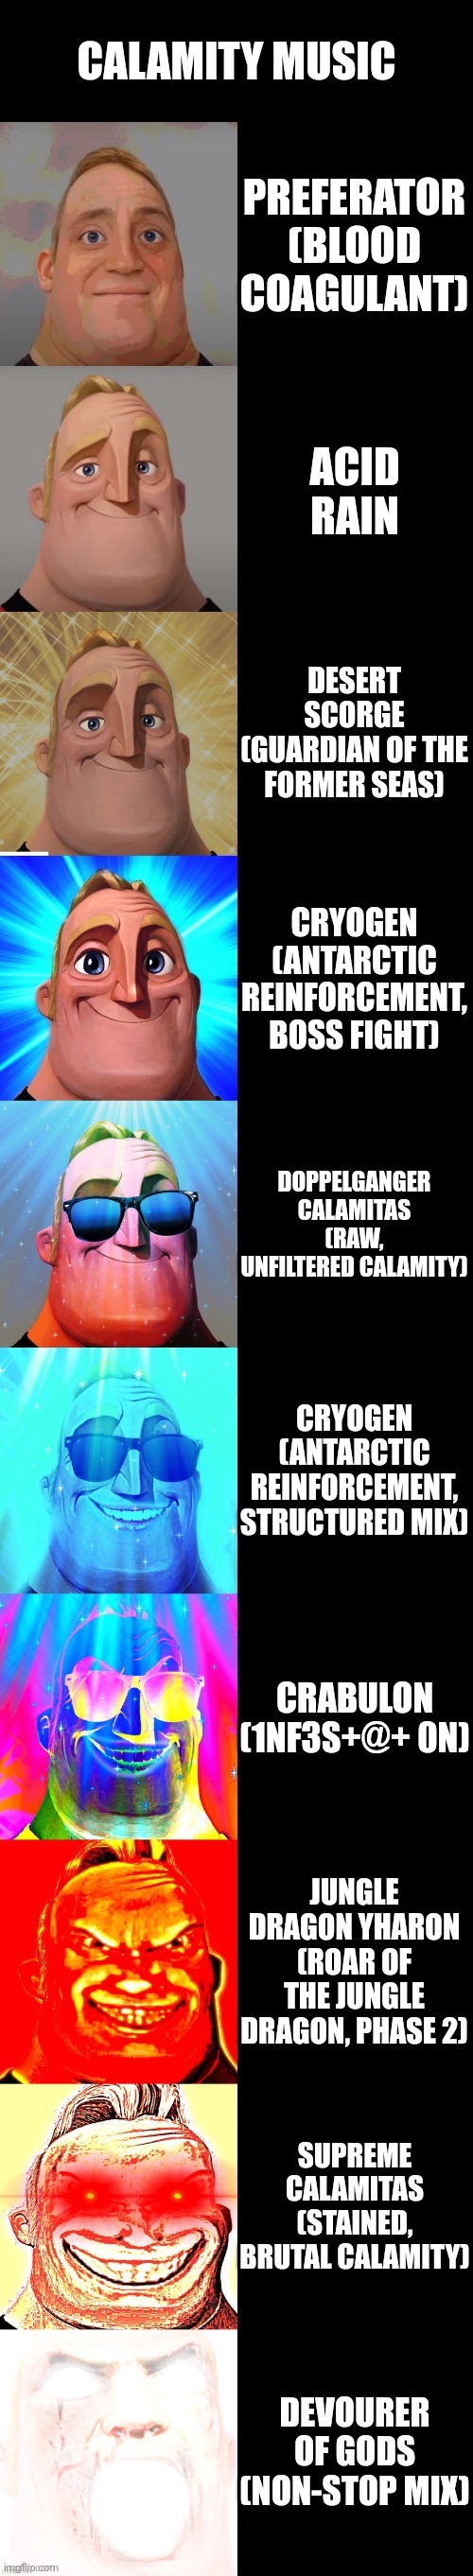 Calamity music | CALAMITY MUSIC; PREFERATOR (BLOOD COAGULANT); ACID RAIN; DESERT SCORGE (GUARDIAN OF THE FORMER SEAS); CRYOGEN (ANTARCTIC REINFORCEMENT, BOSS FIGHT); DOPPELGANGER CALAMITAS (RAW, UNFILTERED CALAMITY); CRYOGEN (ANTARCTIC REINFORCEMENT, STRUCTURED MIX); CRABULON (1NF3S+@+ 0N); JUNGLE DRAGON YHARON (ROAR OF THE JUNGLE DRAGON, PHASE 2); SUPREME CALAMITAS (STAINED, BRUTAL CALAMITY); DEVOURER OF GODS (NON-STOP MIX) | image tagged in mr incredible becoming canny | made w/ Imgflip meme maker